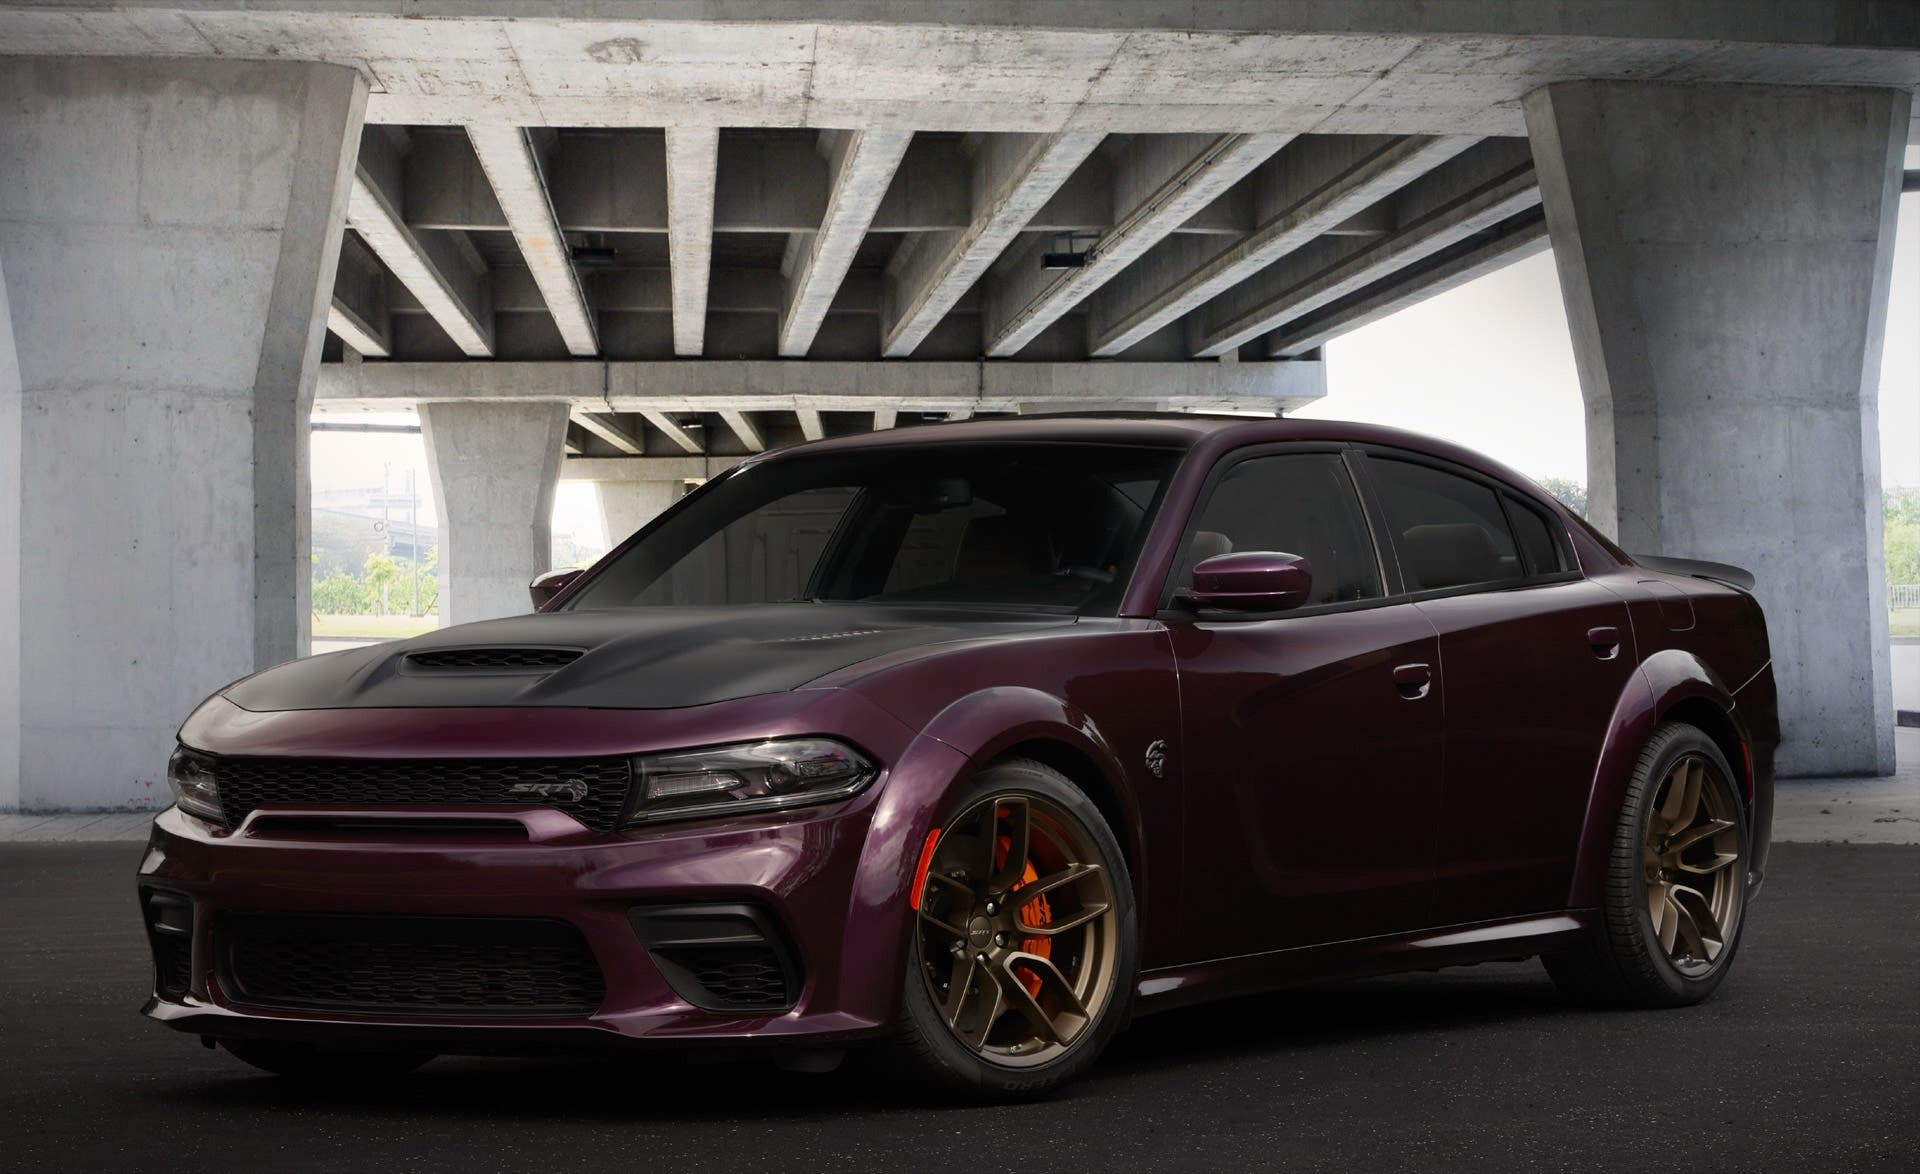 Dodge Charger e Challenger SRT Hellcat Redeye Widebody ecco il nuovo